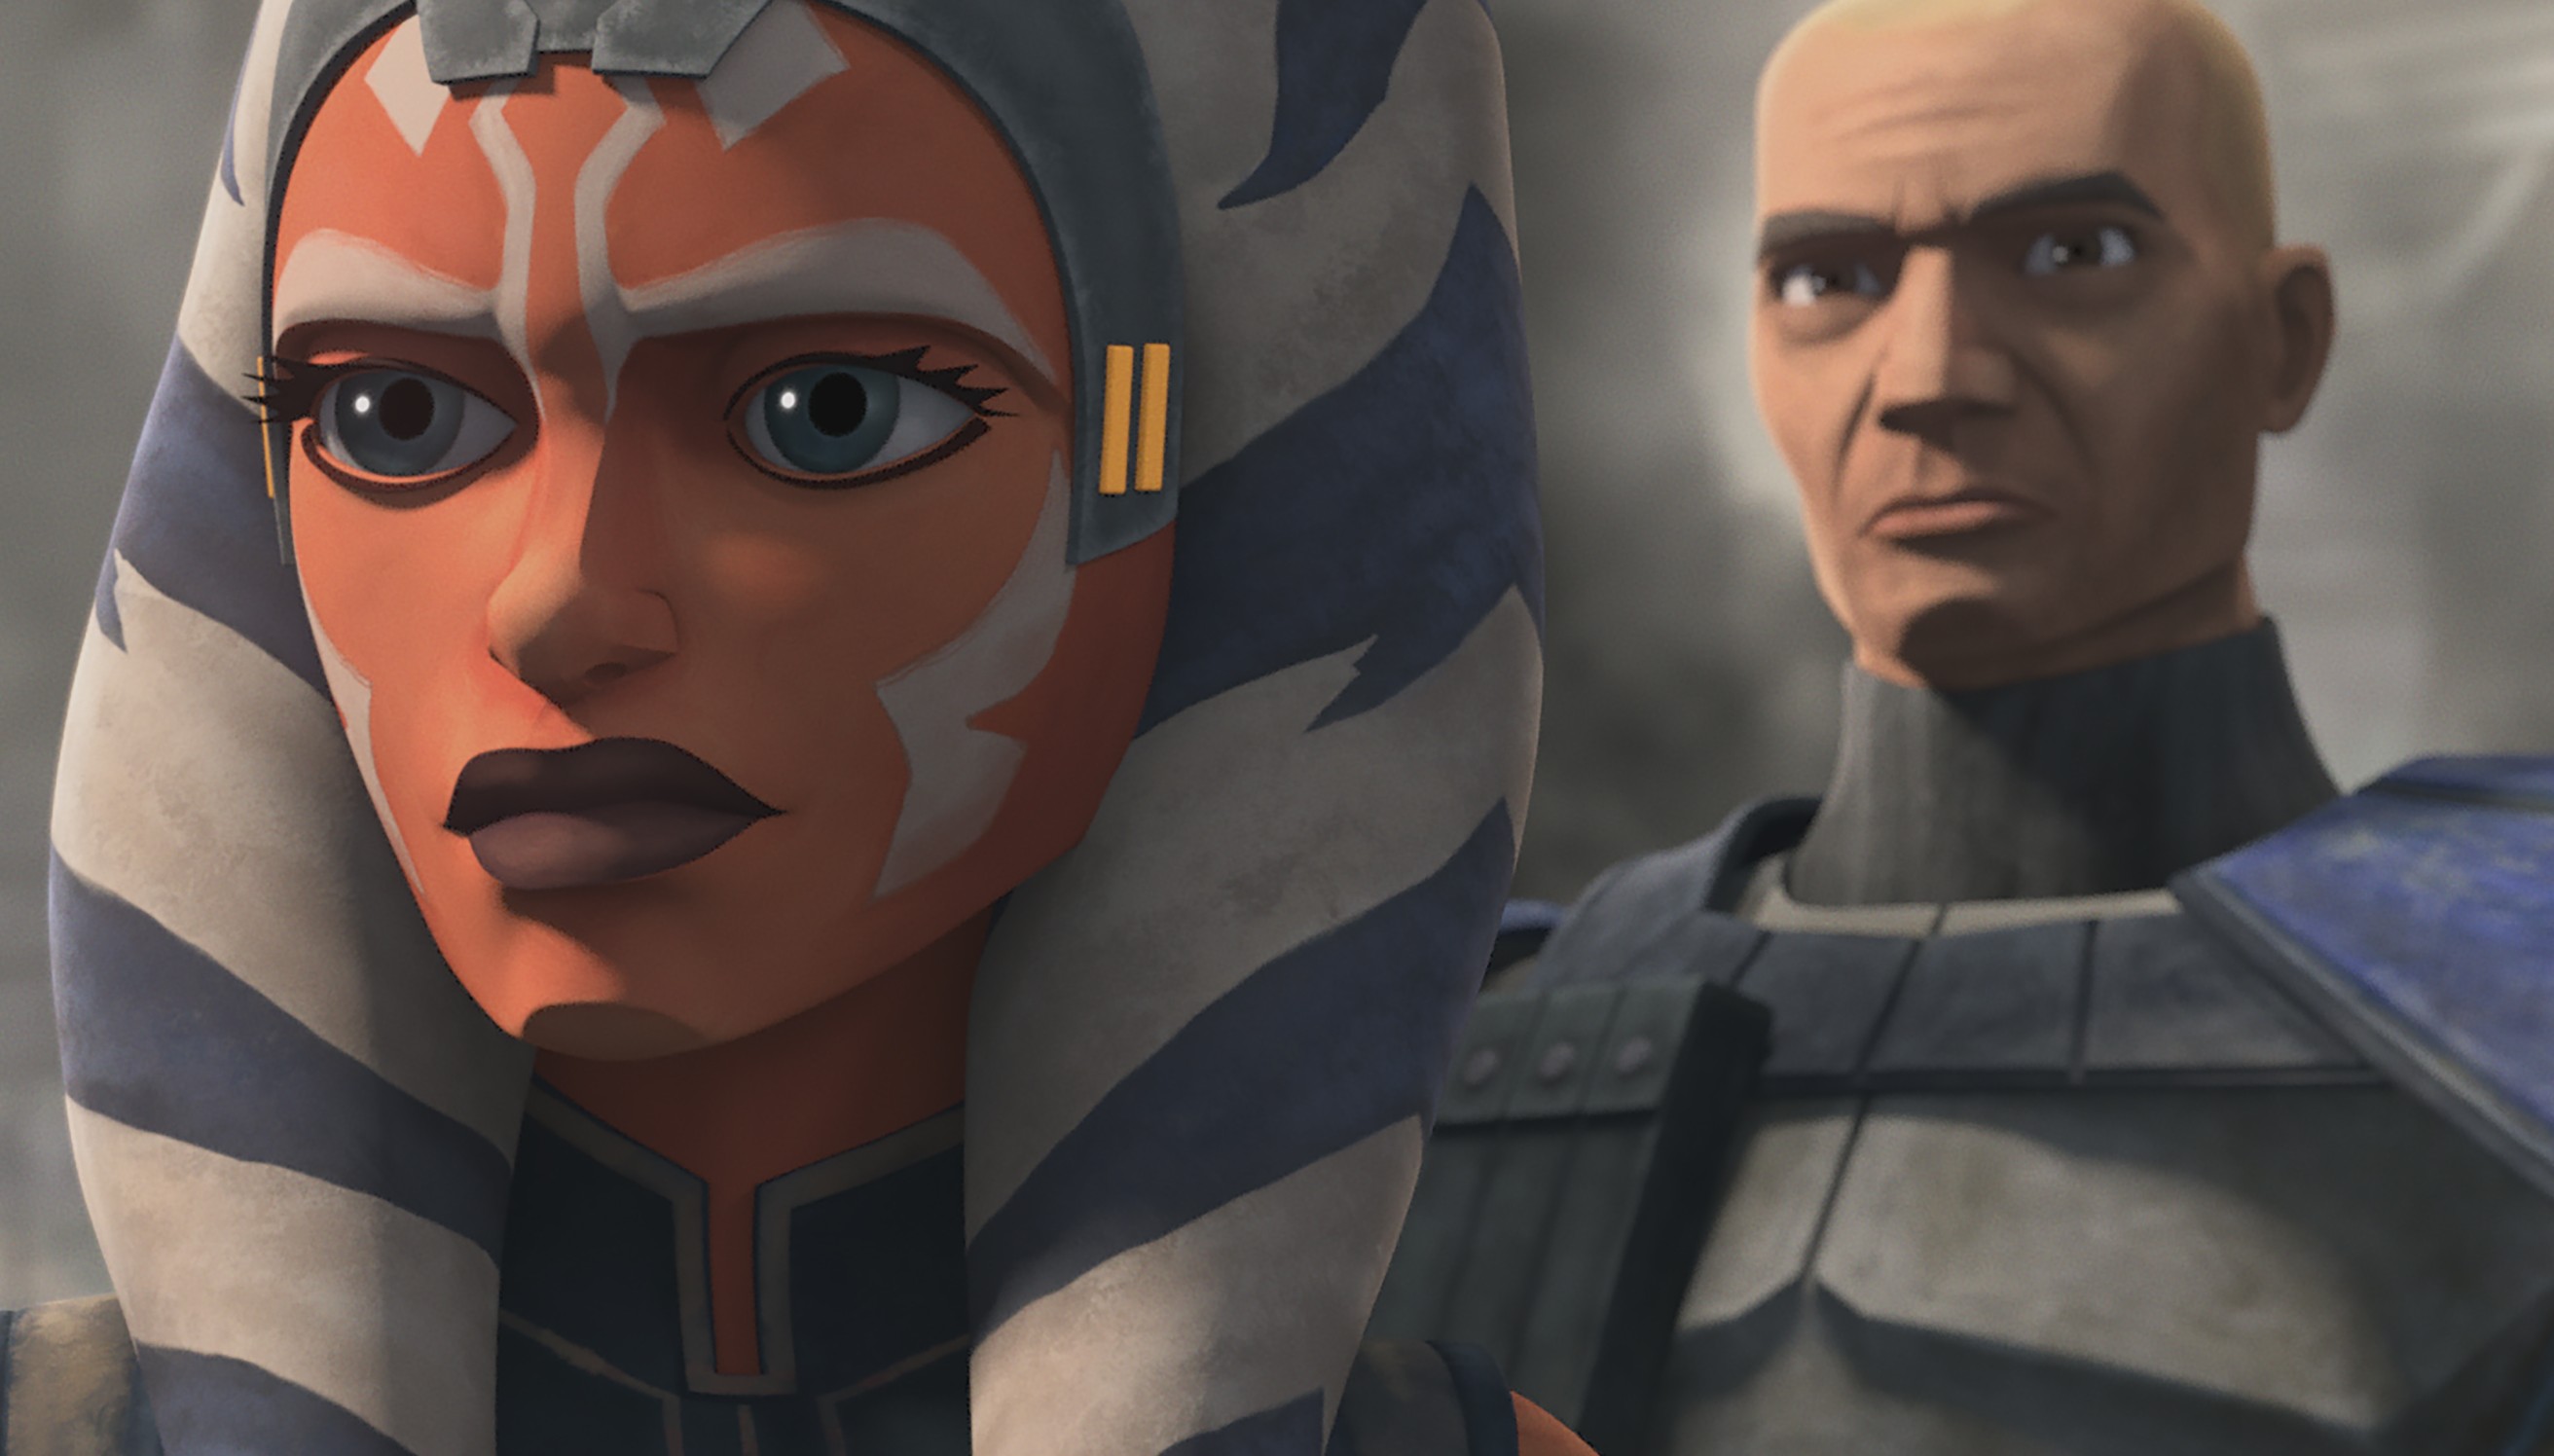 Star Wars: The Clone Wars - Order 66 Explained | Den of Geek